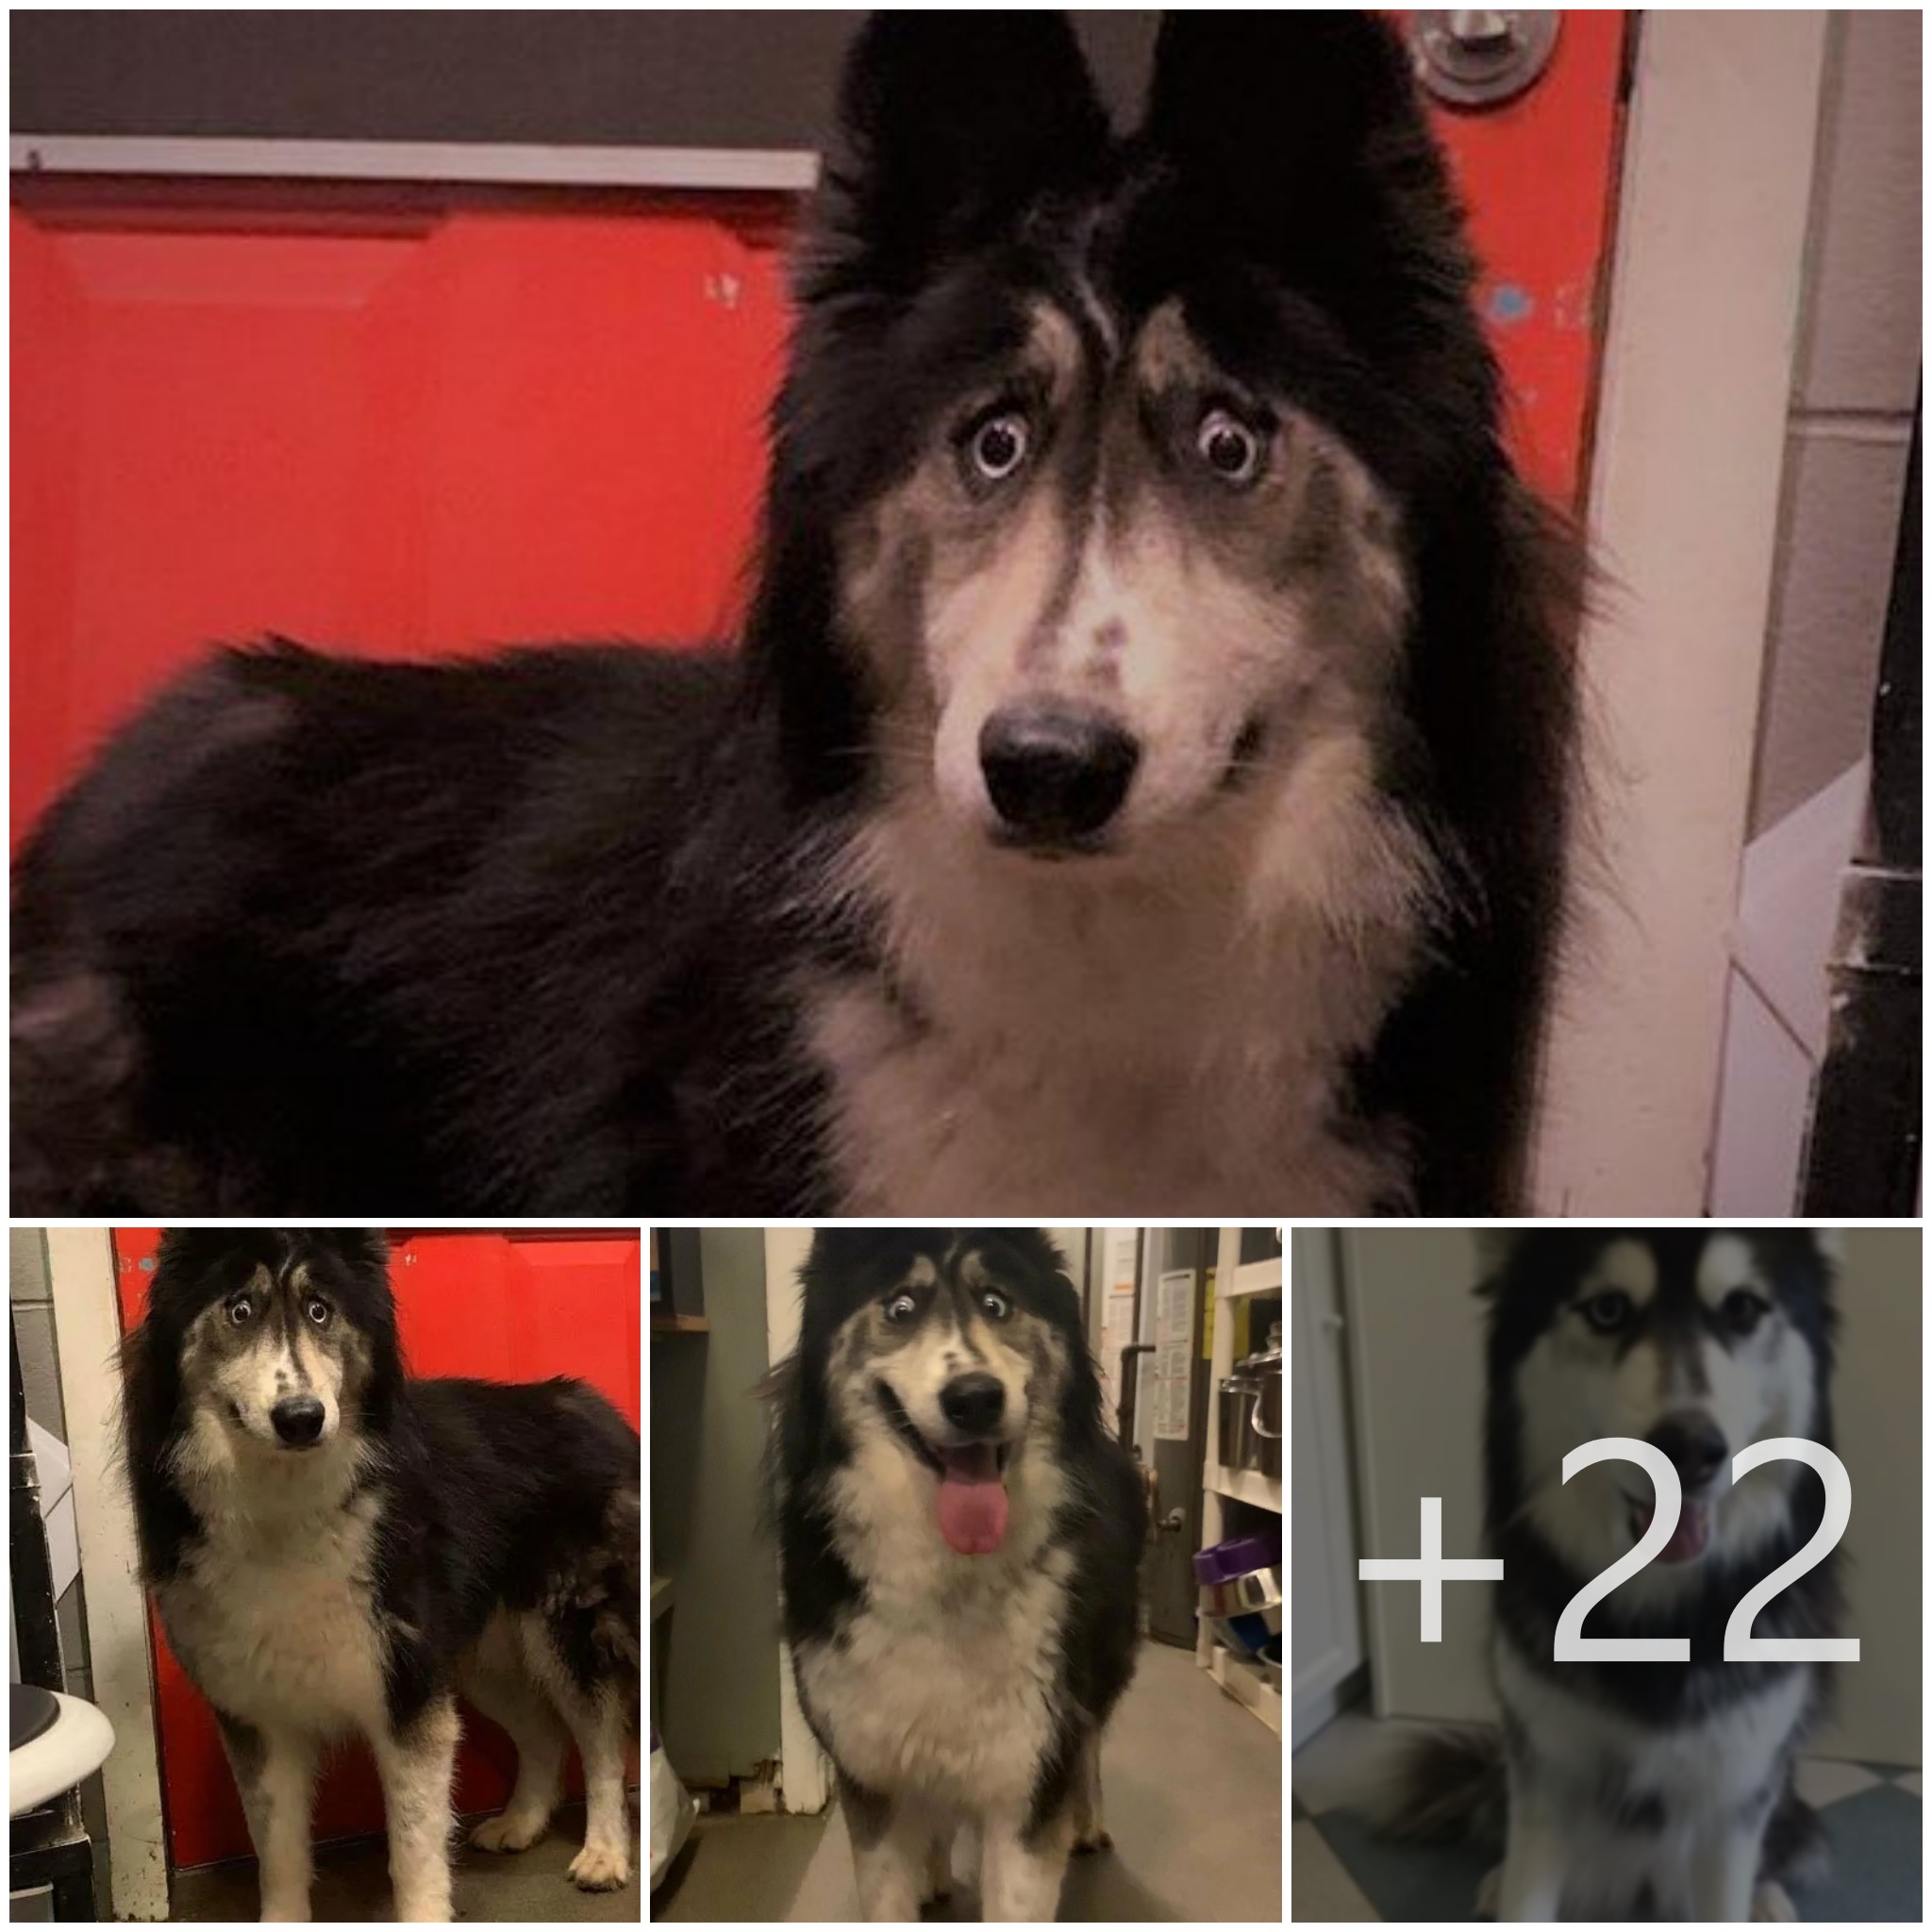 tho “A Breeder Refused to Sell This Husky Dog Because of Its ‘Goofy Face’ and Flamboyant Appearance, Capturing the Charm of All Dogs and Delighting Netizens” tho